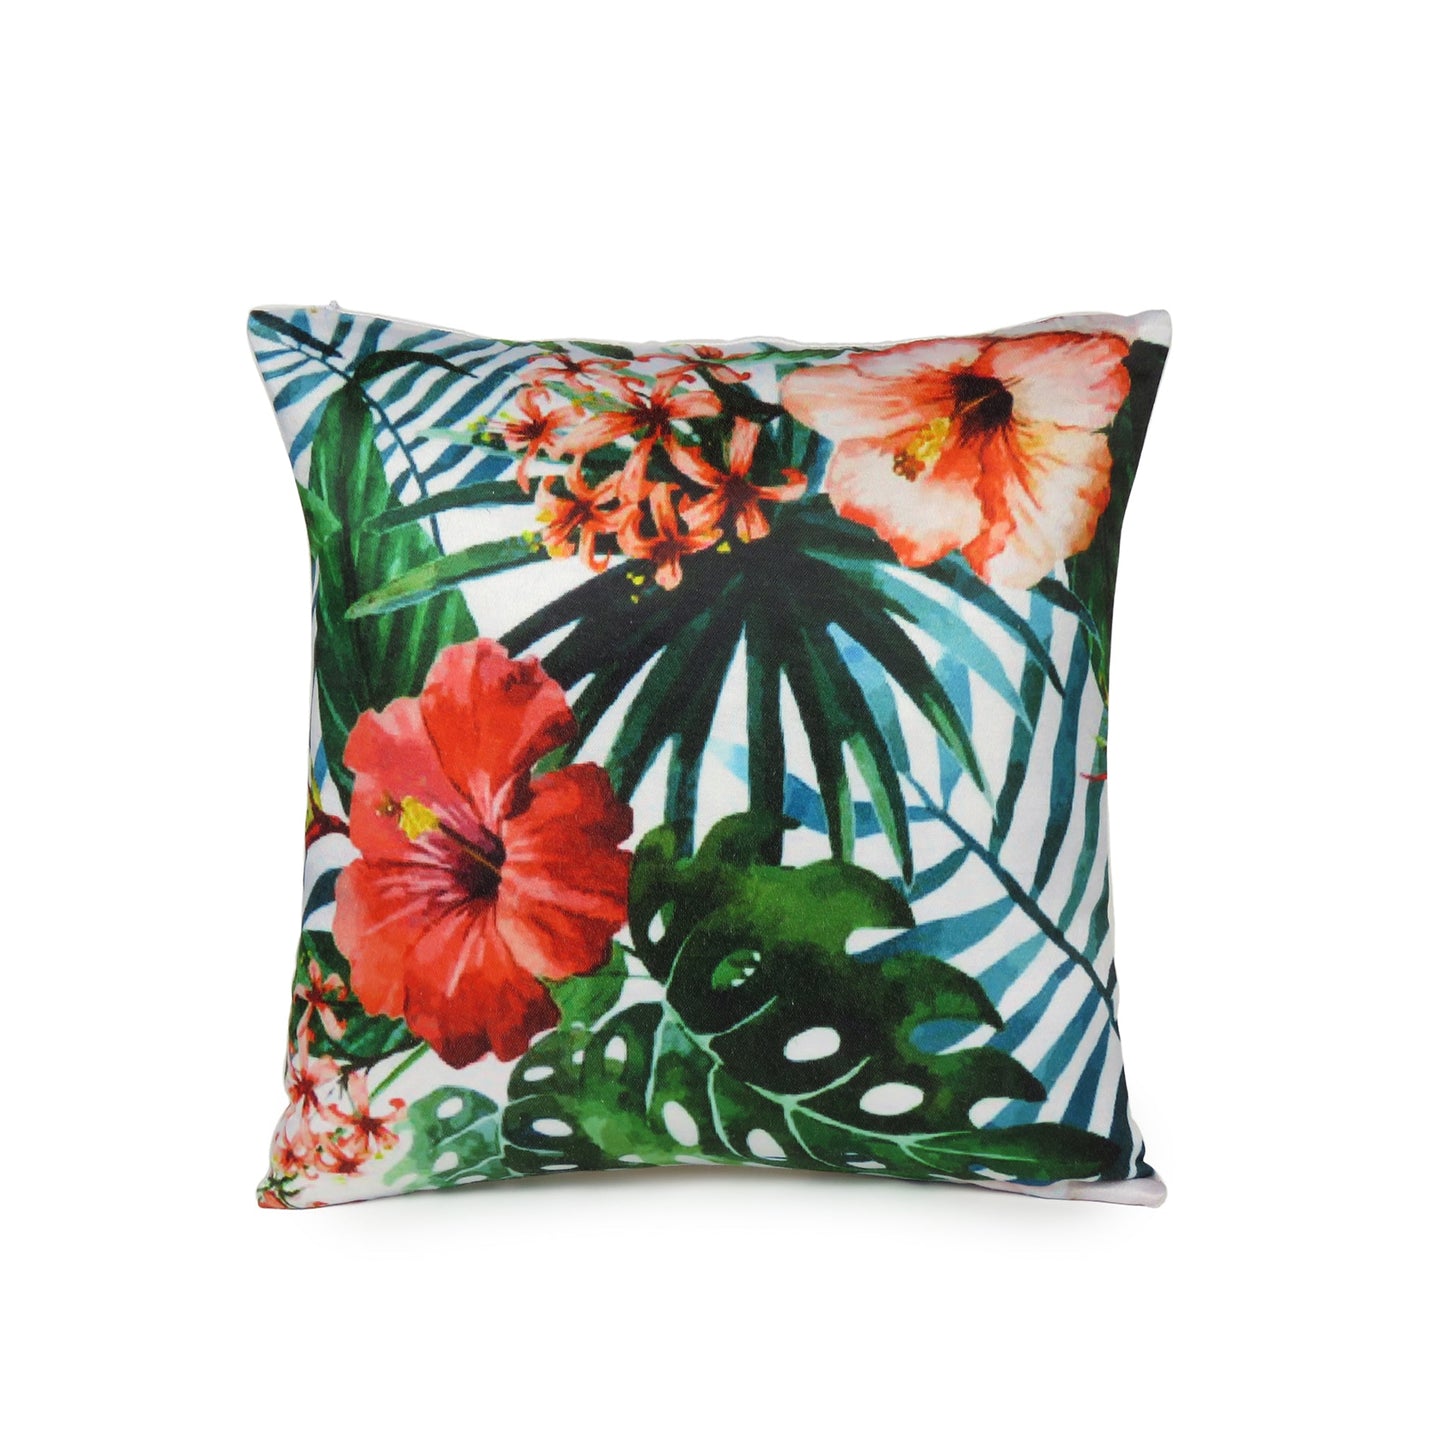 Multicolor Floral & Tropical Leaf Printed Cushion Cover in Set of 2